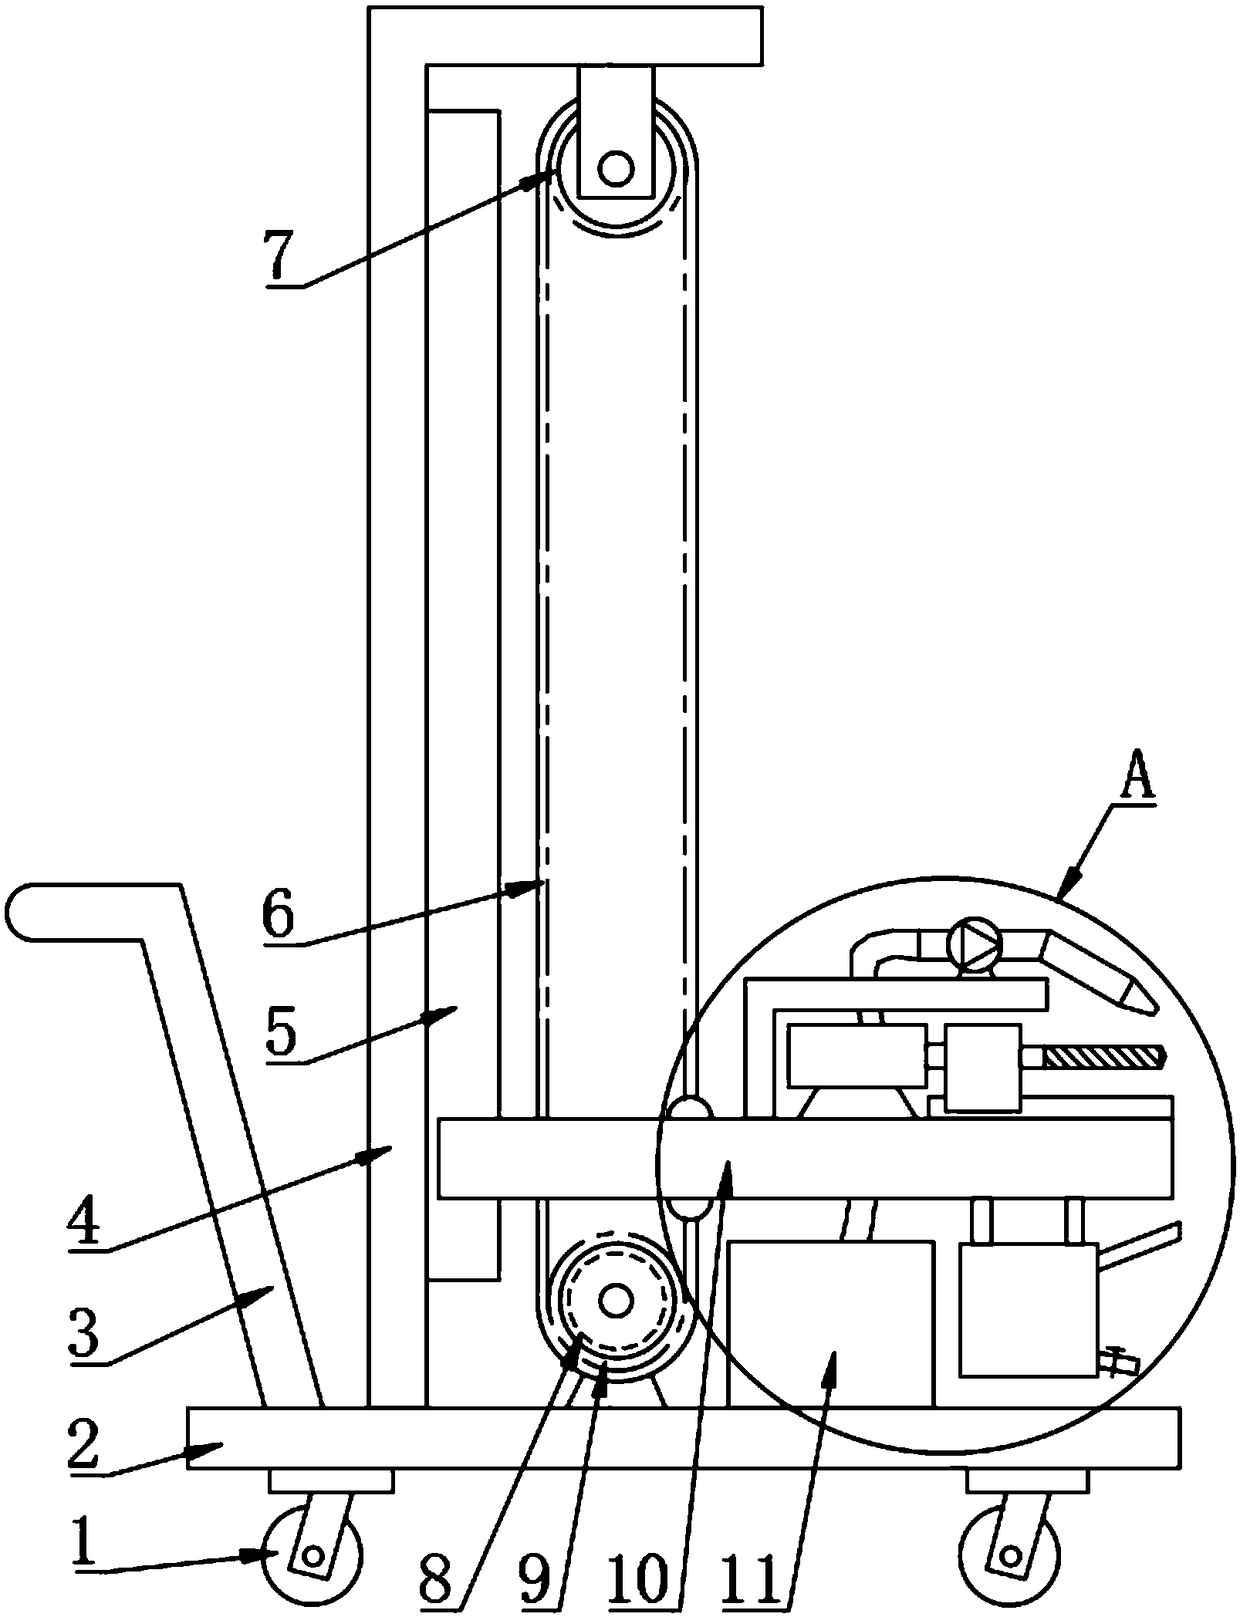 Wall punching device with water spraying function